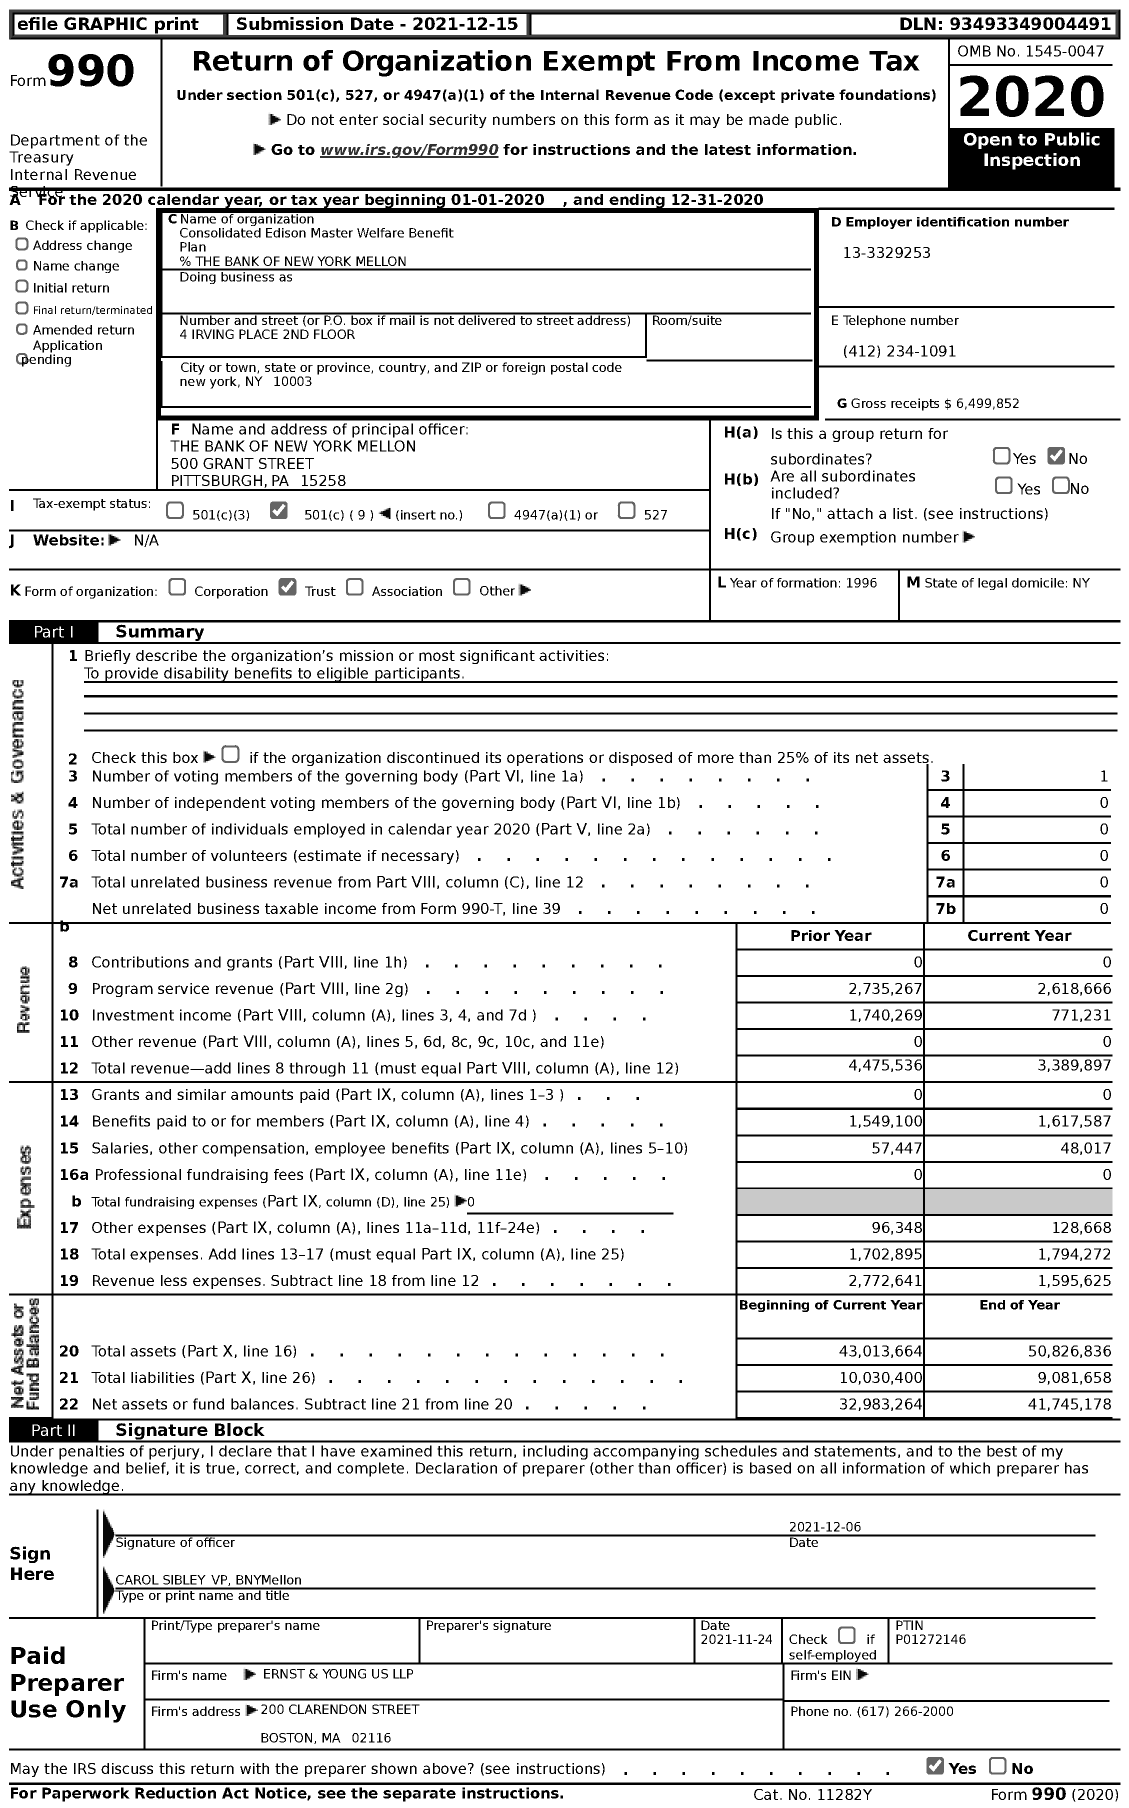 Image of first page of 2020 Form 990 for Consolidated Edison Master Welfare Benefit Plan